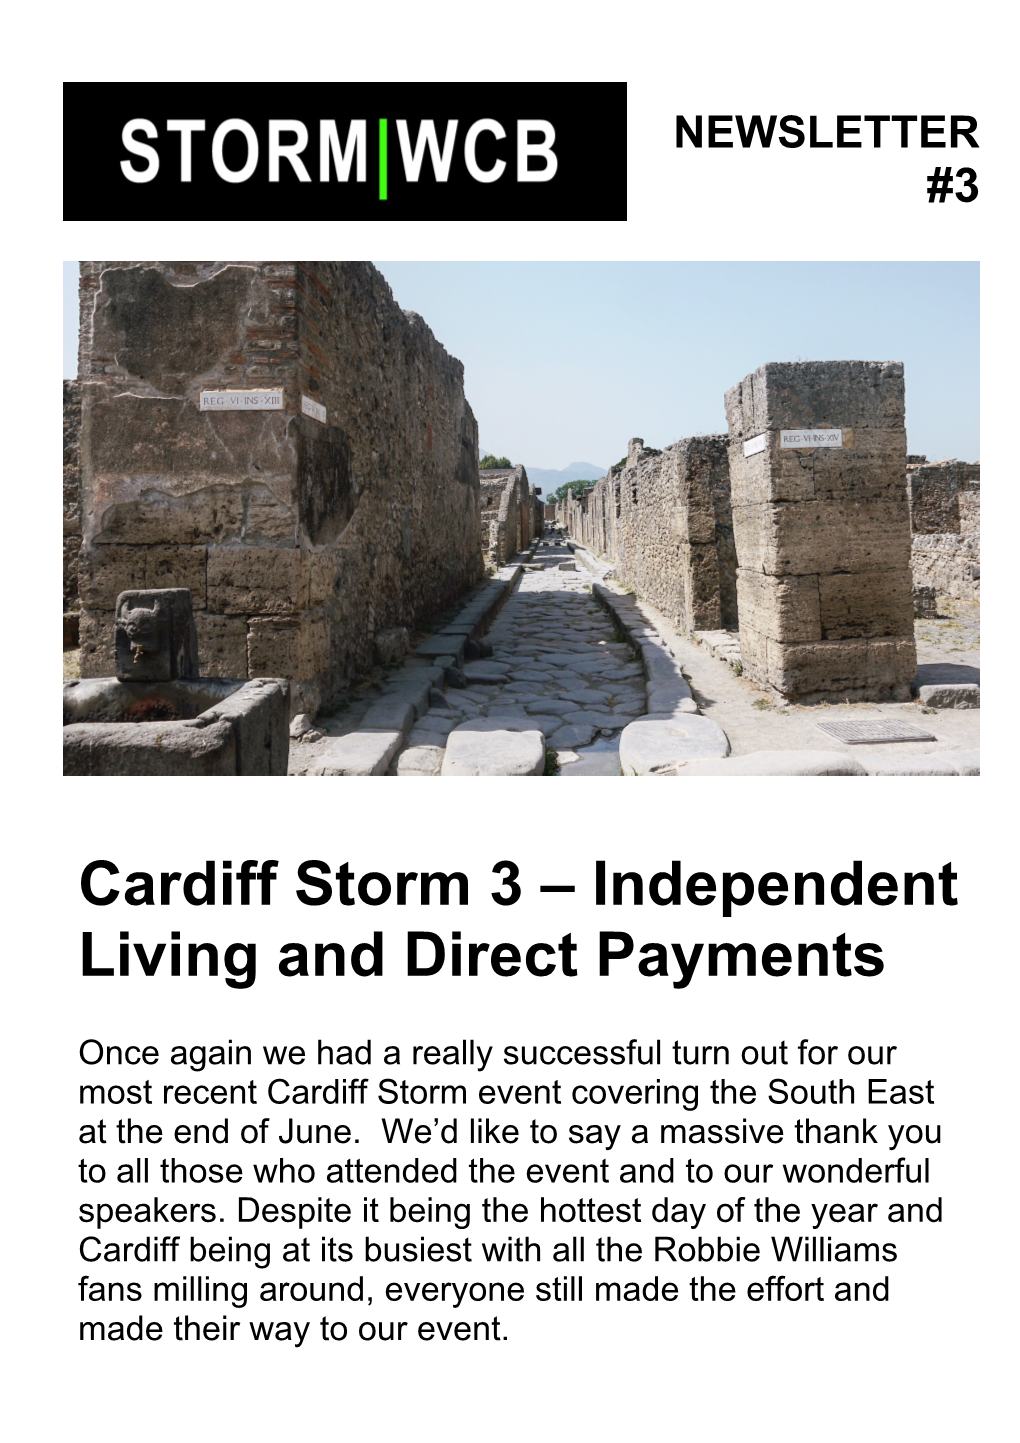 Cardiff Storm 3 Independent Living and Direct Payments